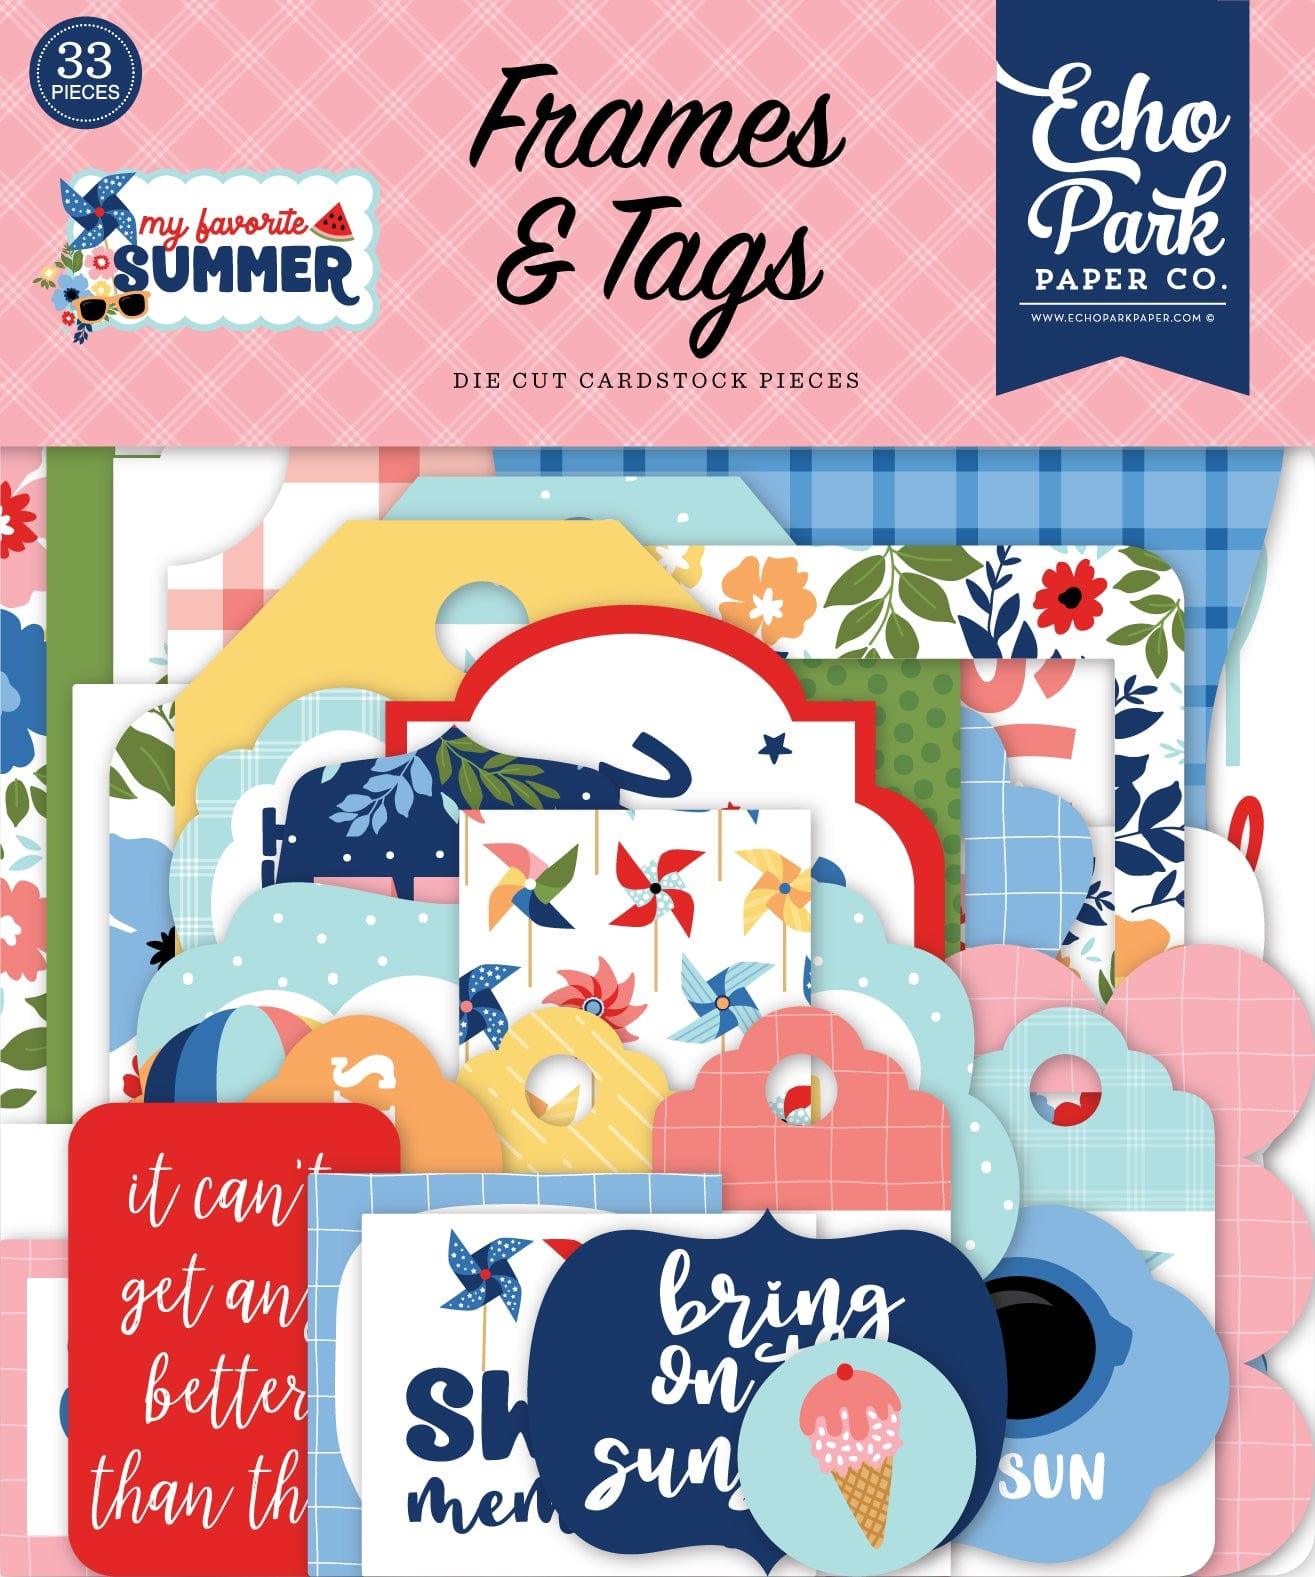 My Favorite Summer Collection 5 x 5 Scrapbook Tags & Frames Die Cuts by Echo Park Paper - Scrapbook Supply Companies